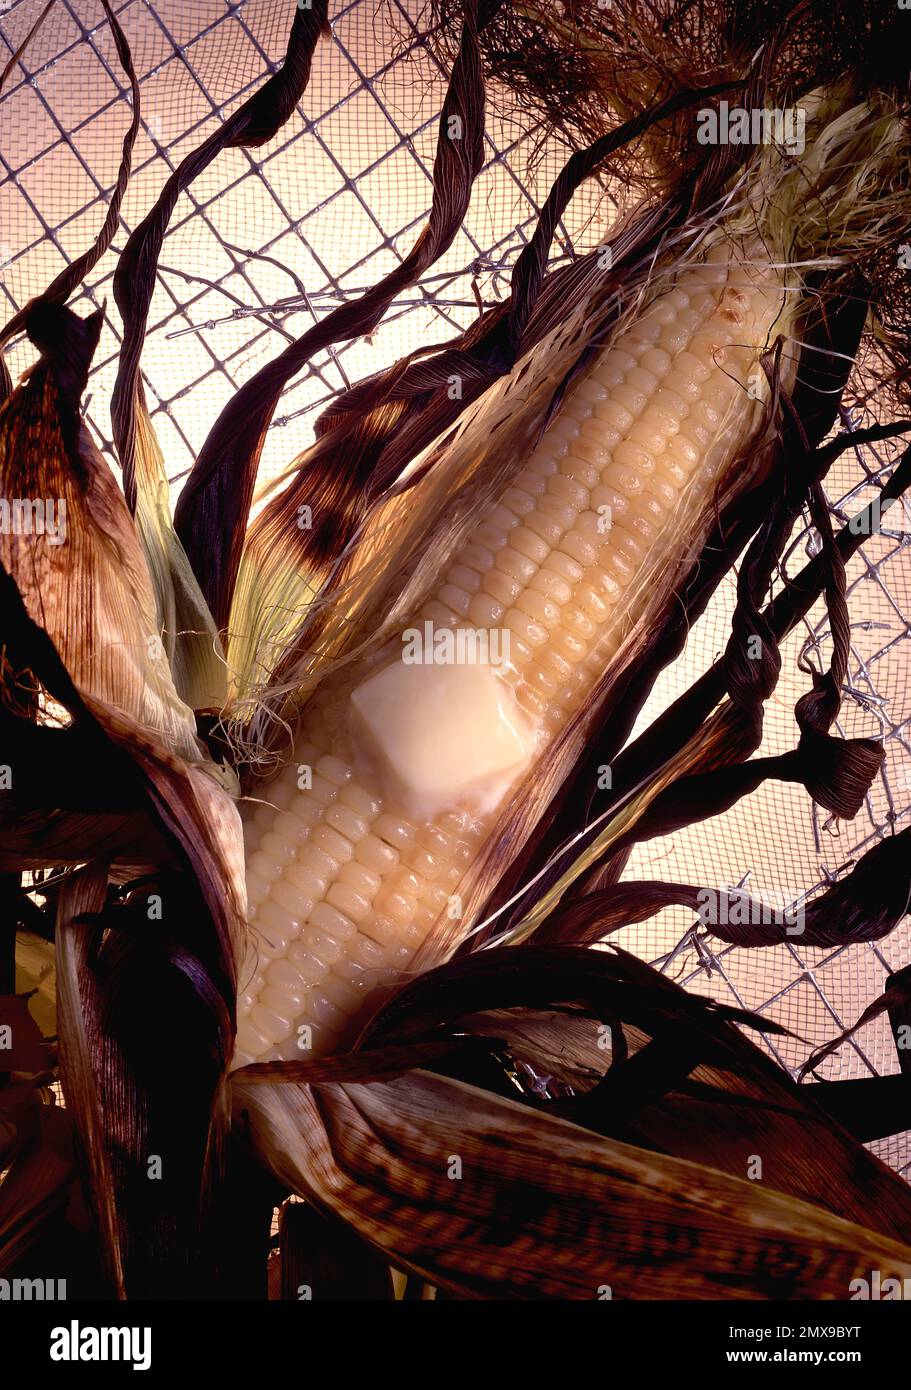 Grilled corn with husk on in a studio photograph.  Brightly back lit, sitting on a metal mesh.  Melting square of butter on top. Dramatic. Stock Photo